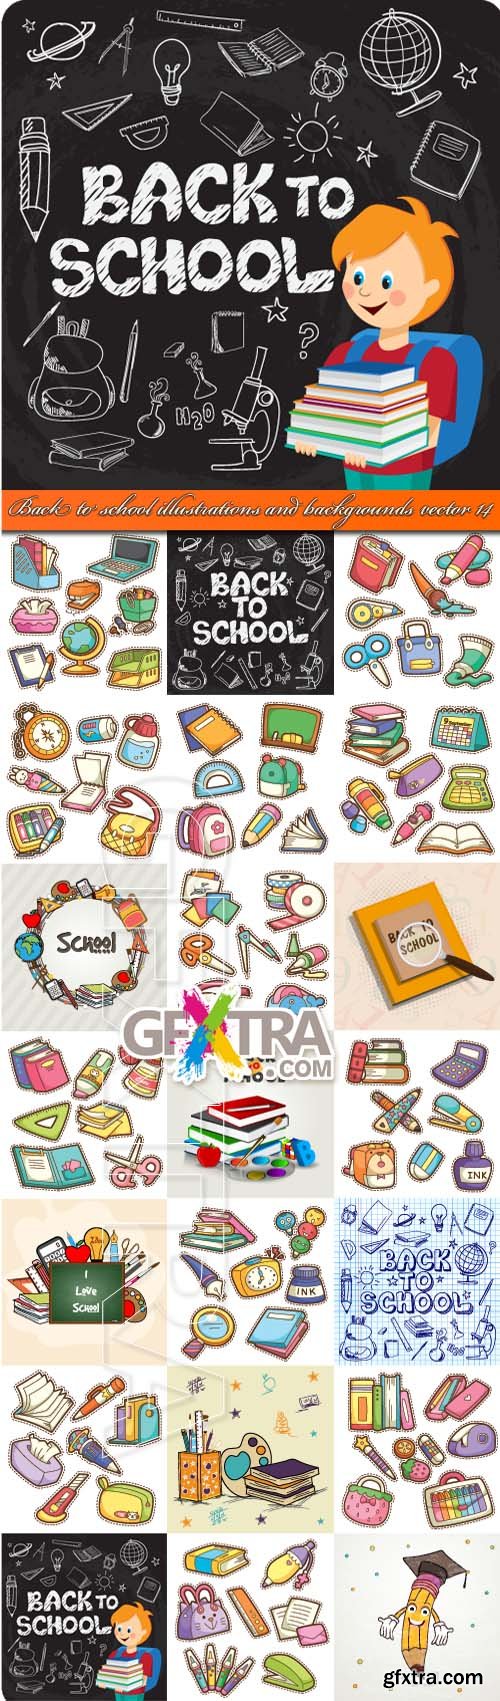 Back to school illustrations and backgrounds vector 14